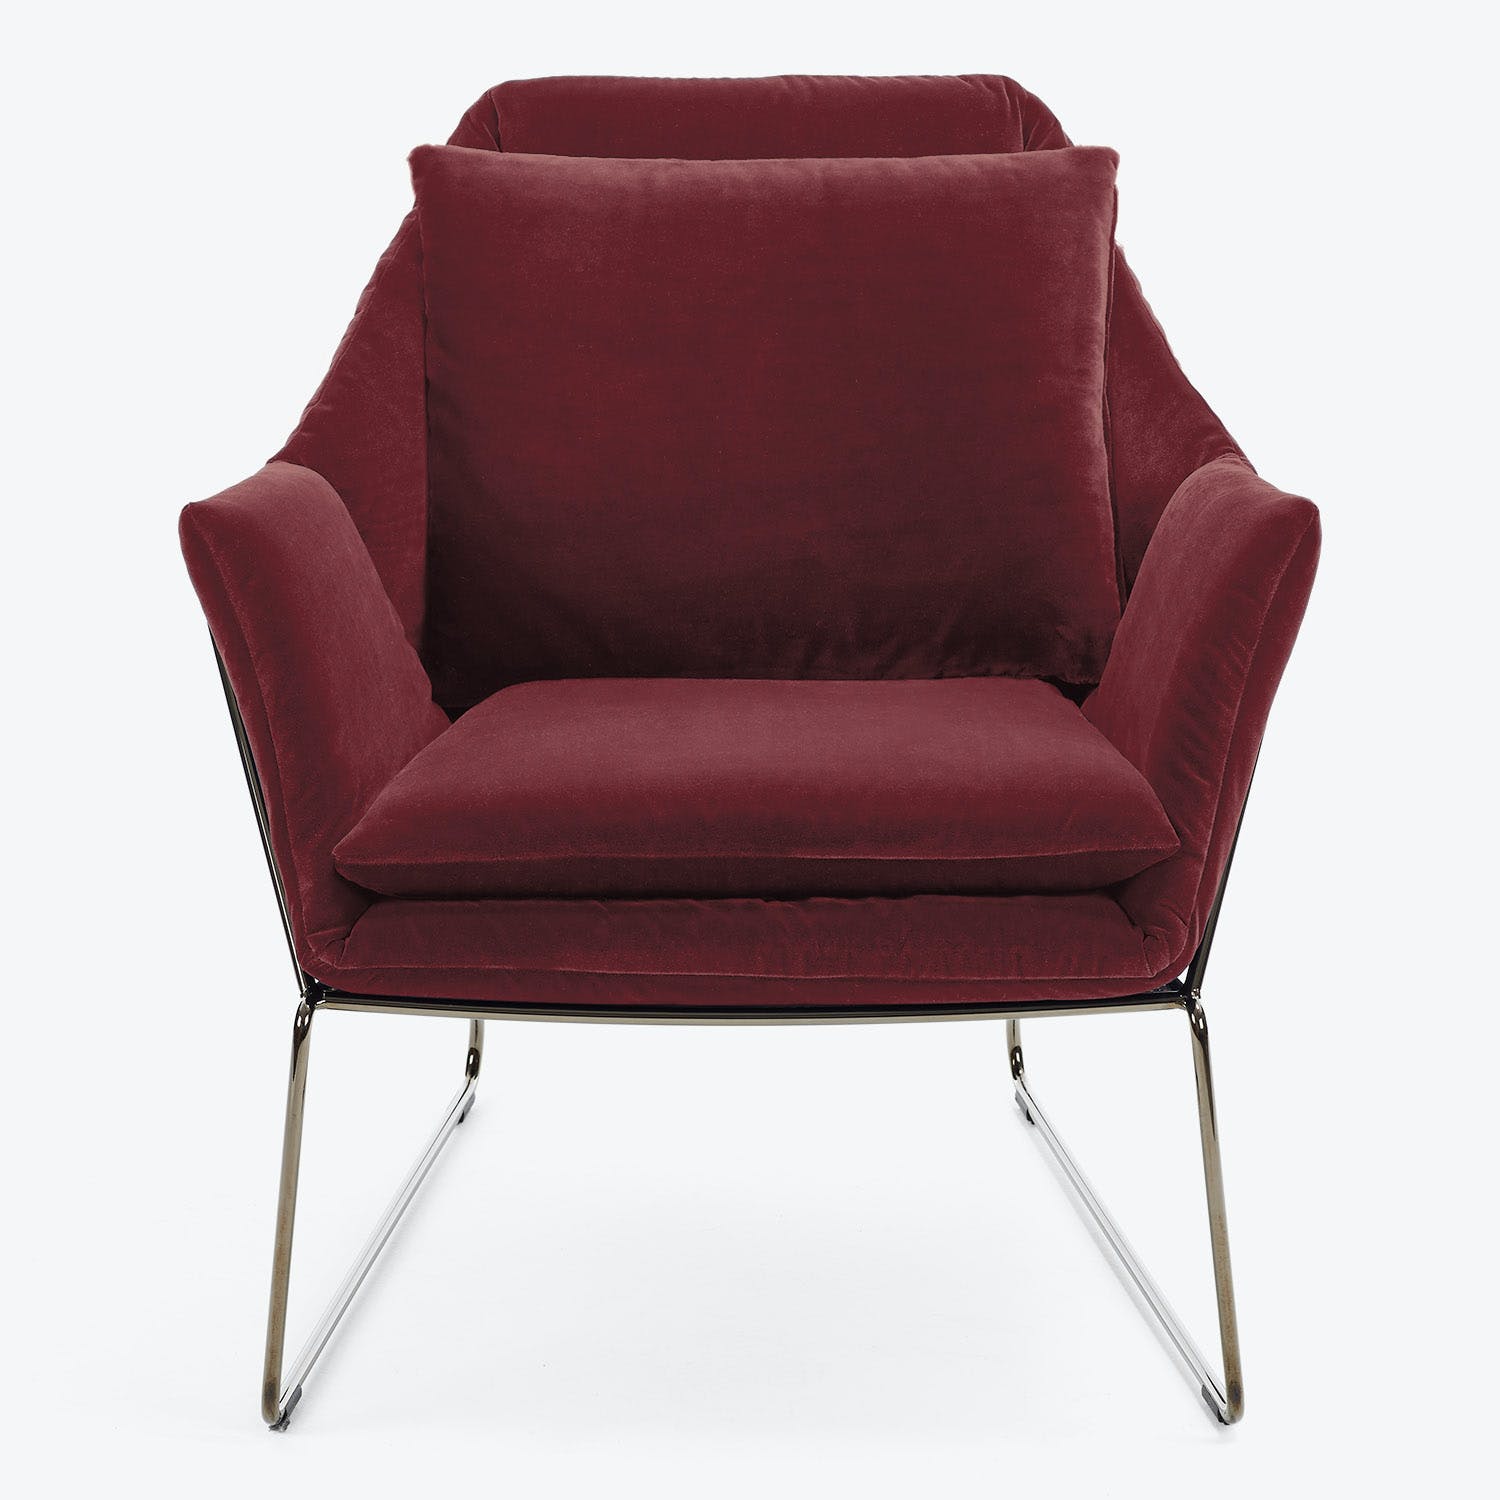 Contemporary single-seat armchair with plush red velvet upholstery and sleek metal frame